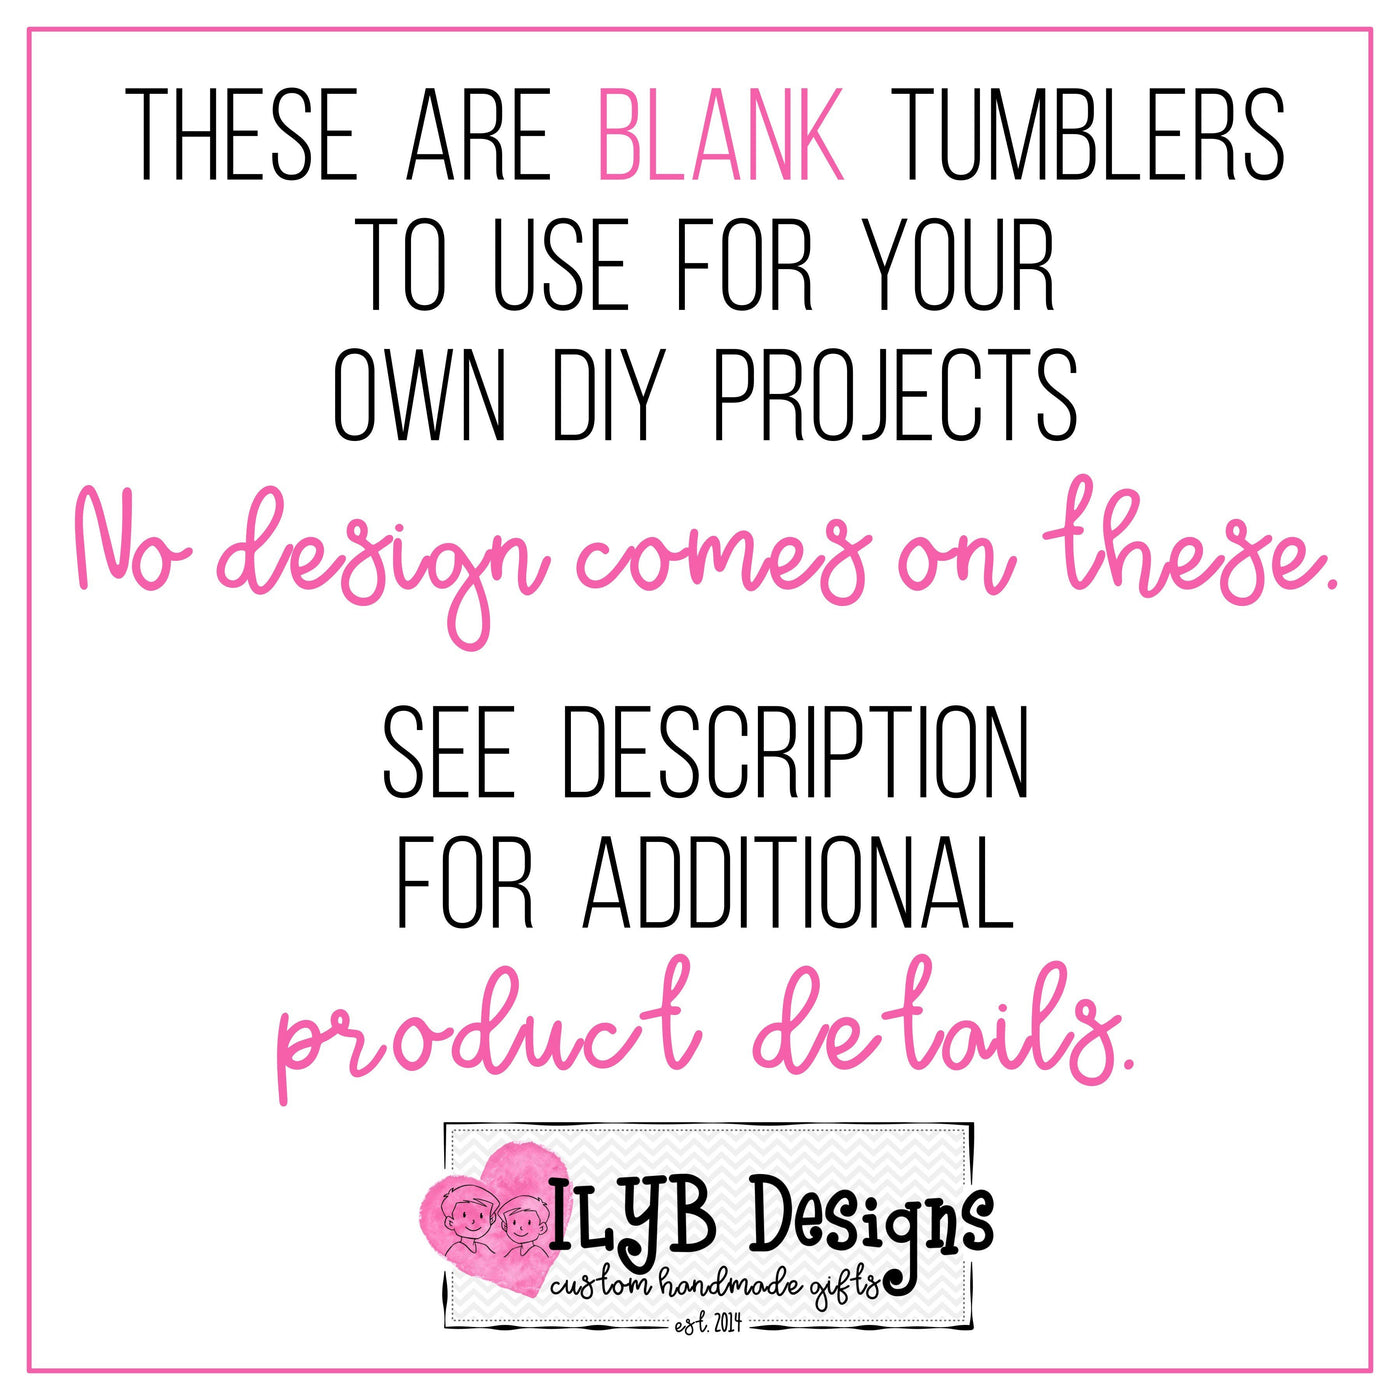 These are blank tumblers to use for your own DIY projects. No designs come on these. See description for additional product details.